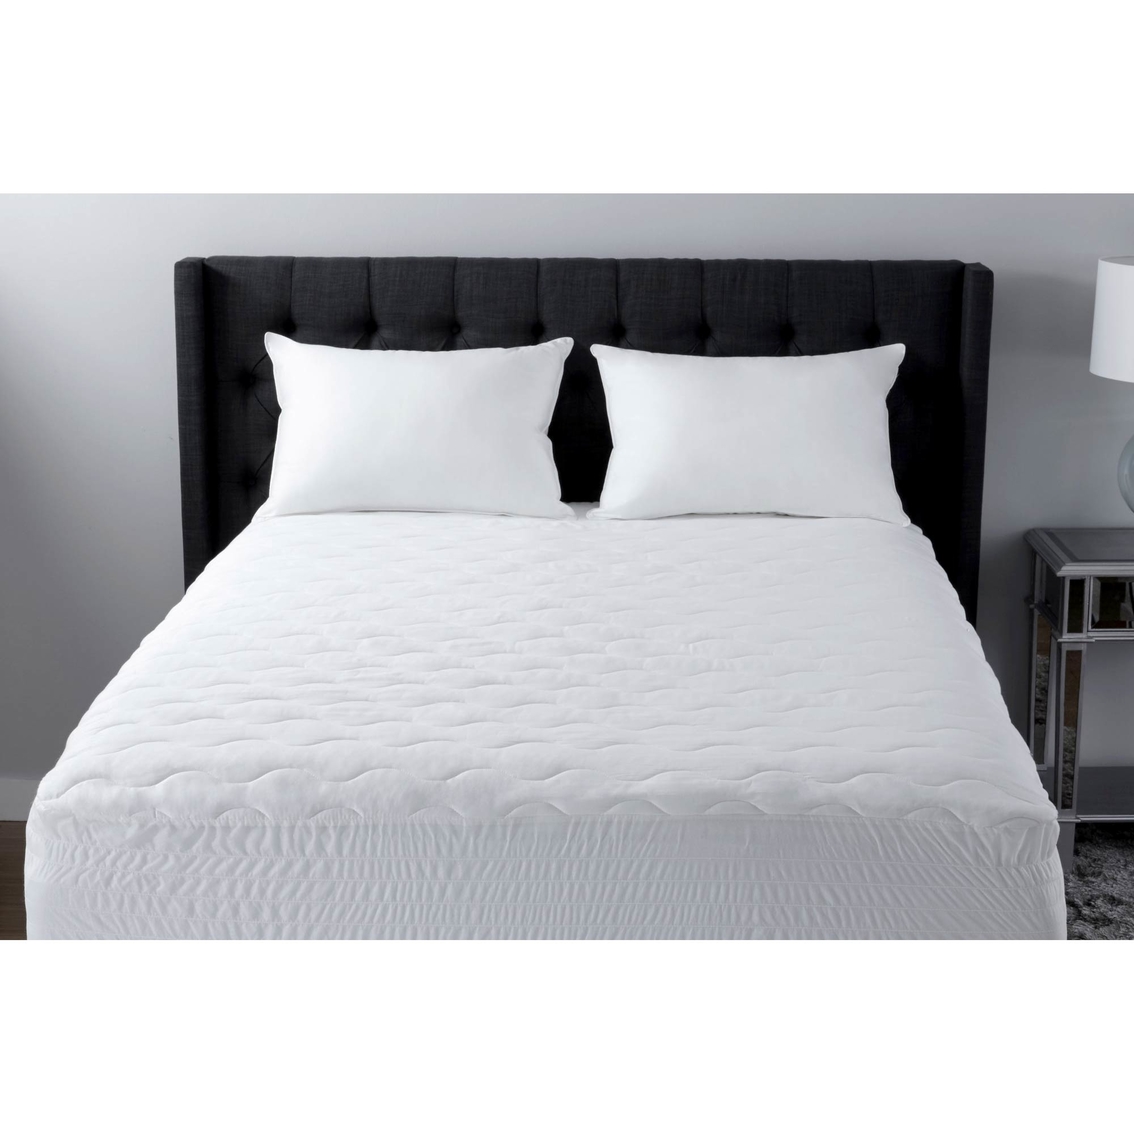 Beautyrest Black Ultimate Protection Mattress Pad ...